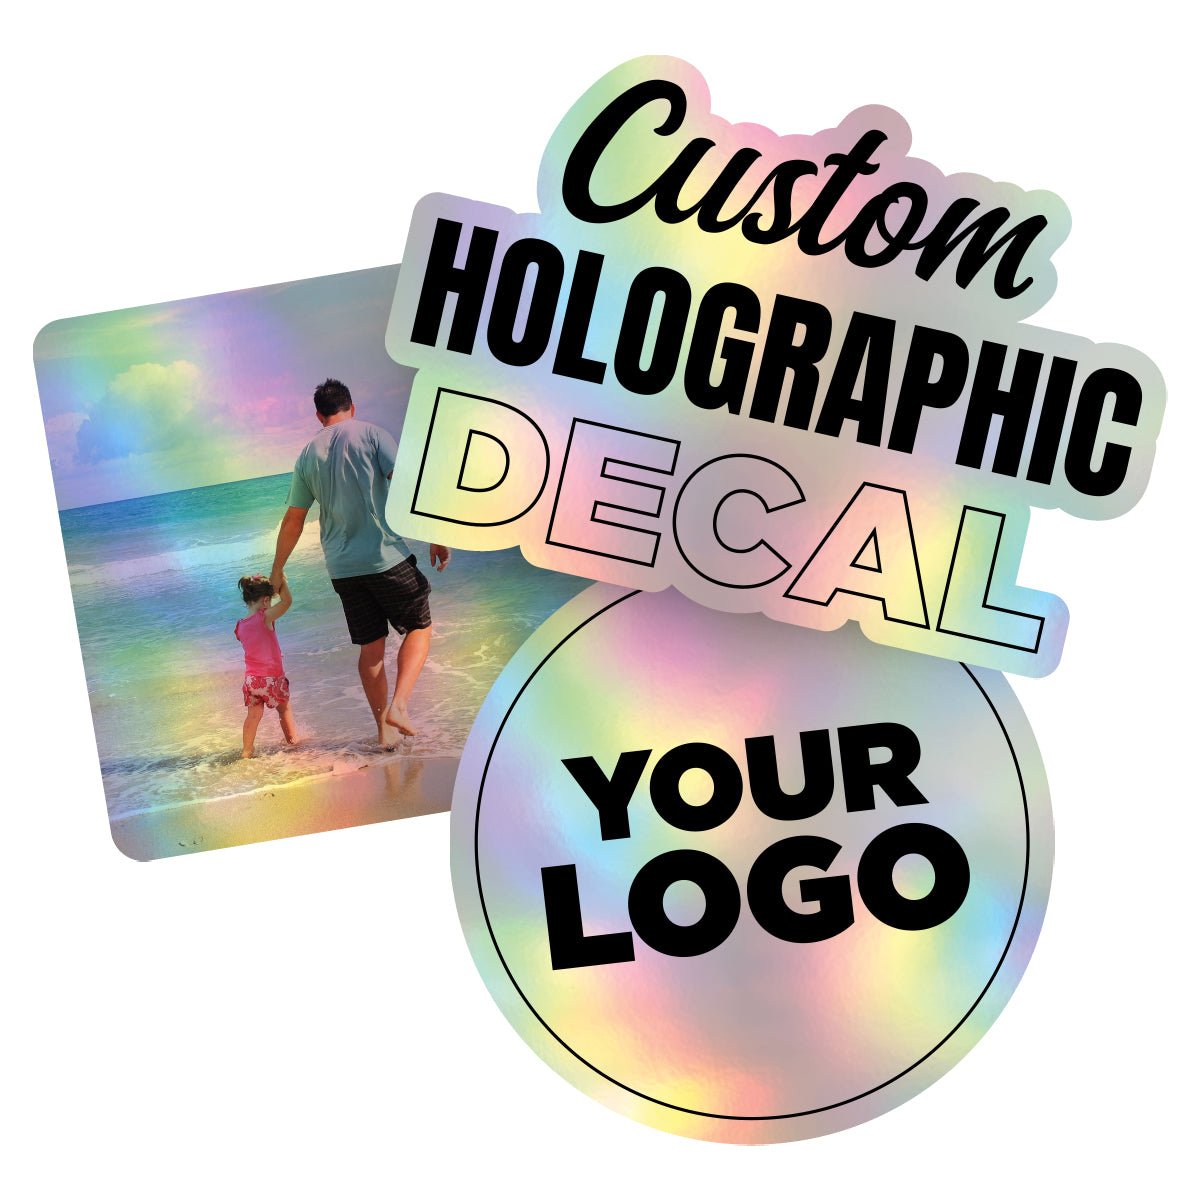 Personalized Holographic Vinyl Sticker Decal Custom Made Any Logo, Image, Text, Or Name Die Cut To Shape - 50 Pack, 10 Inch, Circle